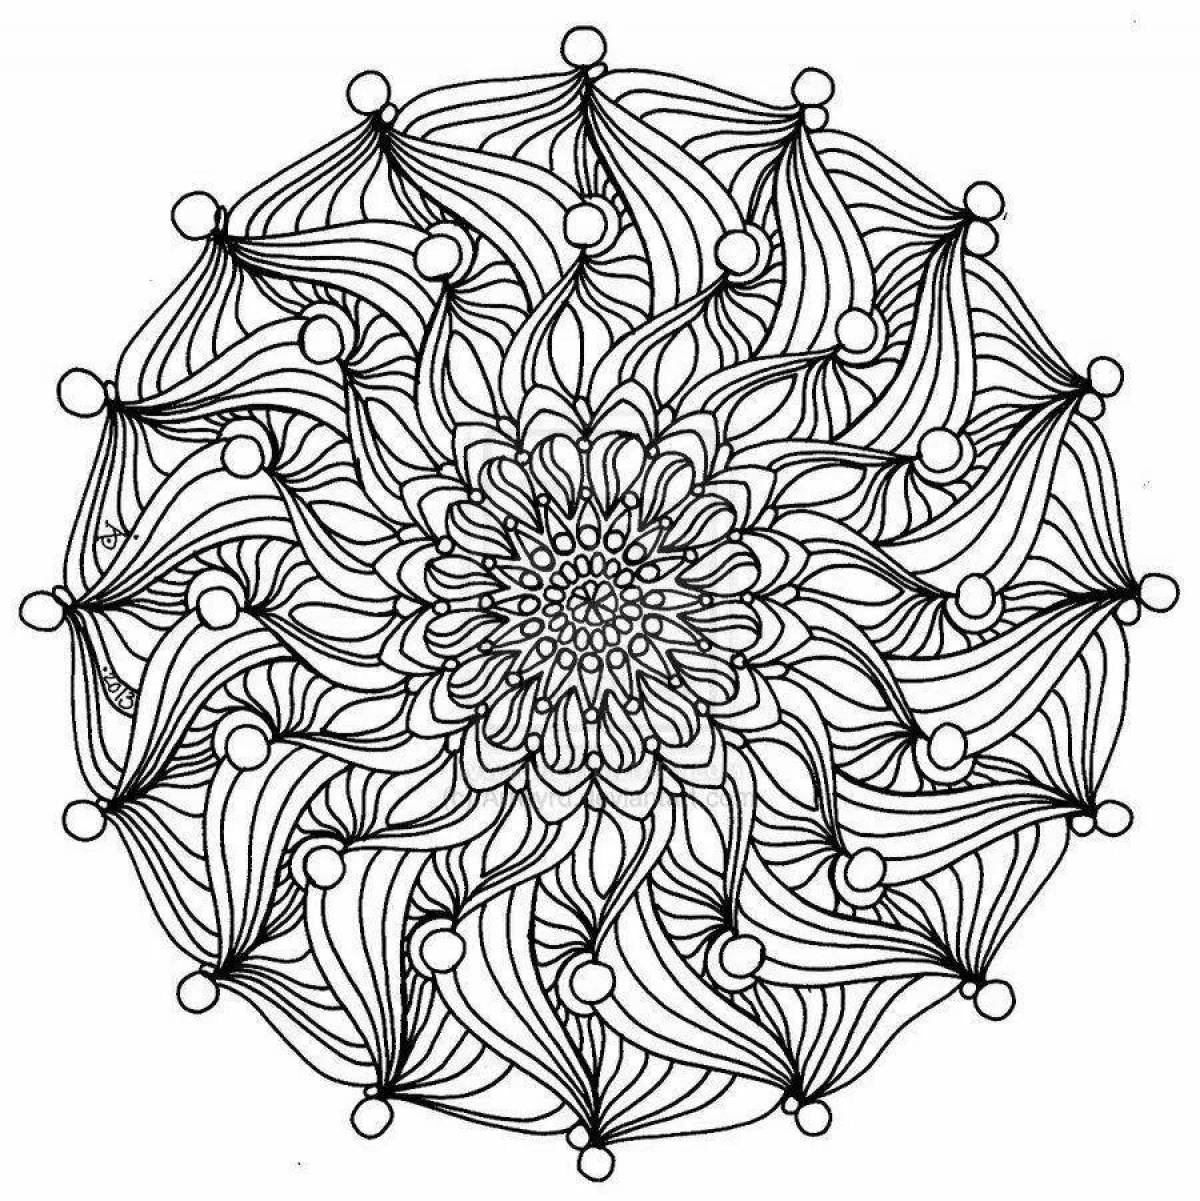 Calm coloring book for meditation and relaxation